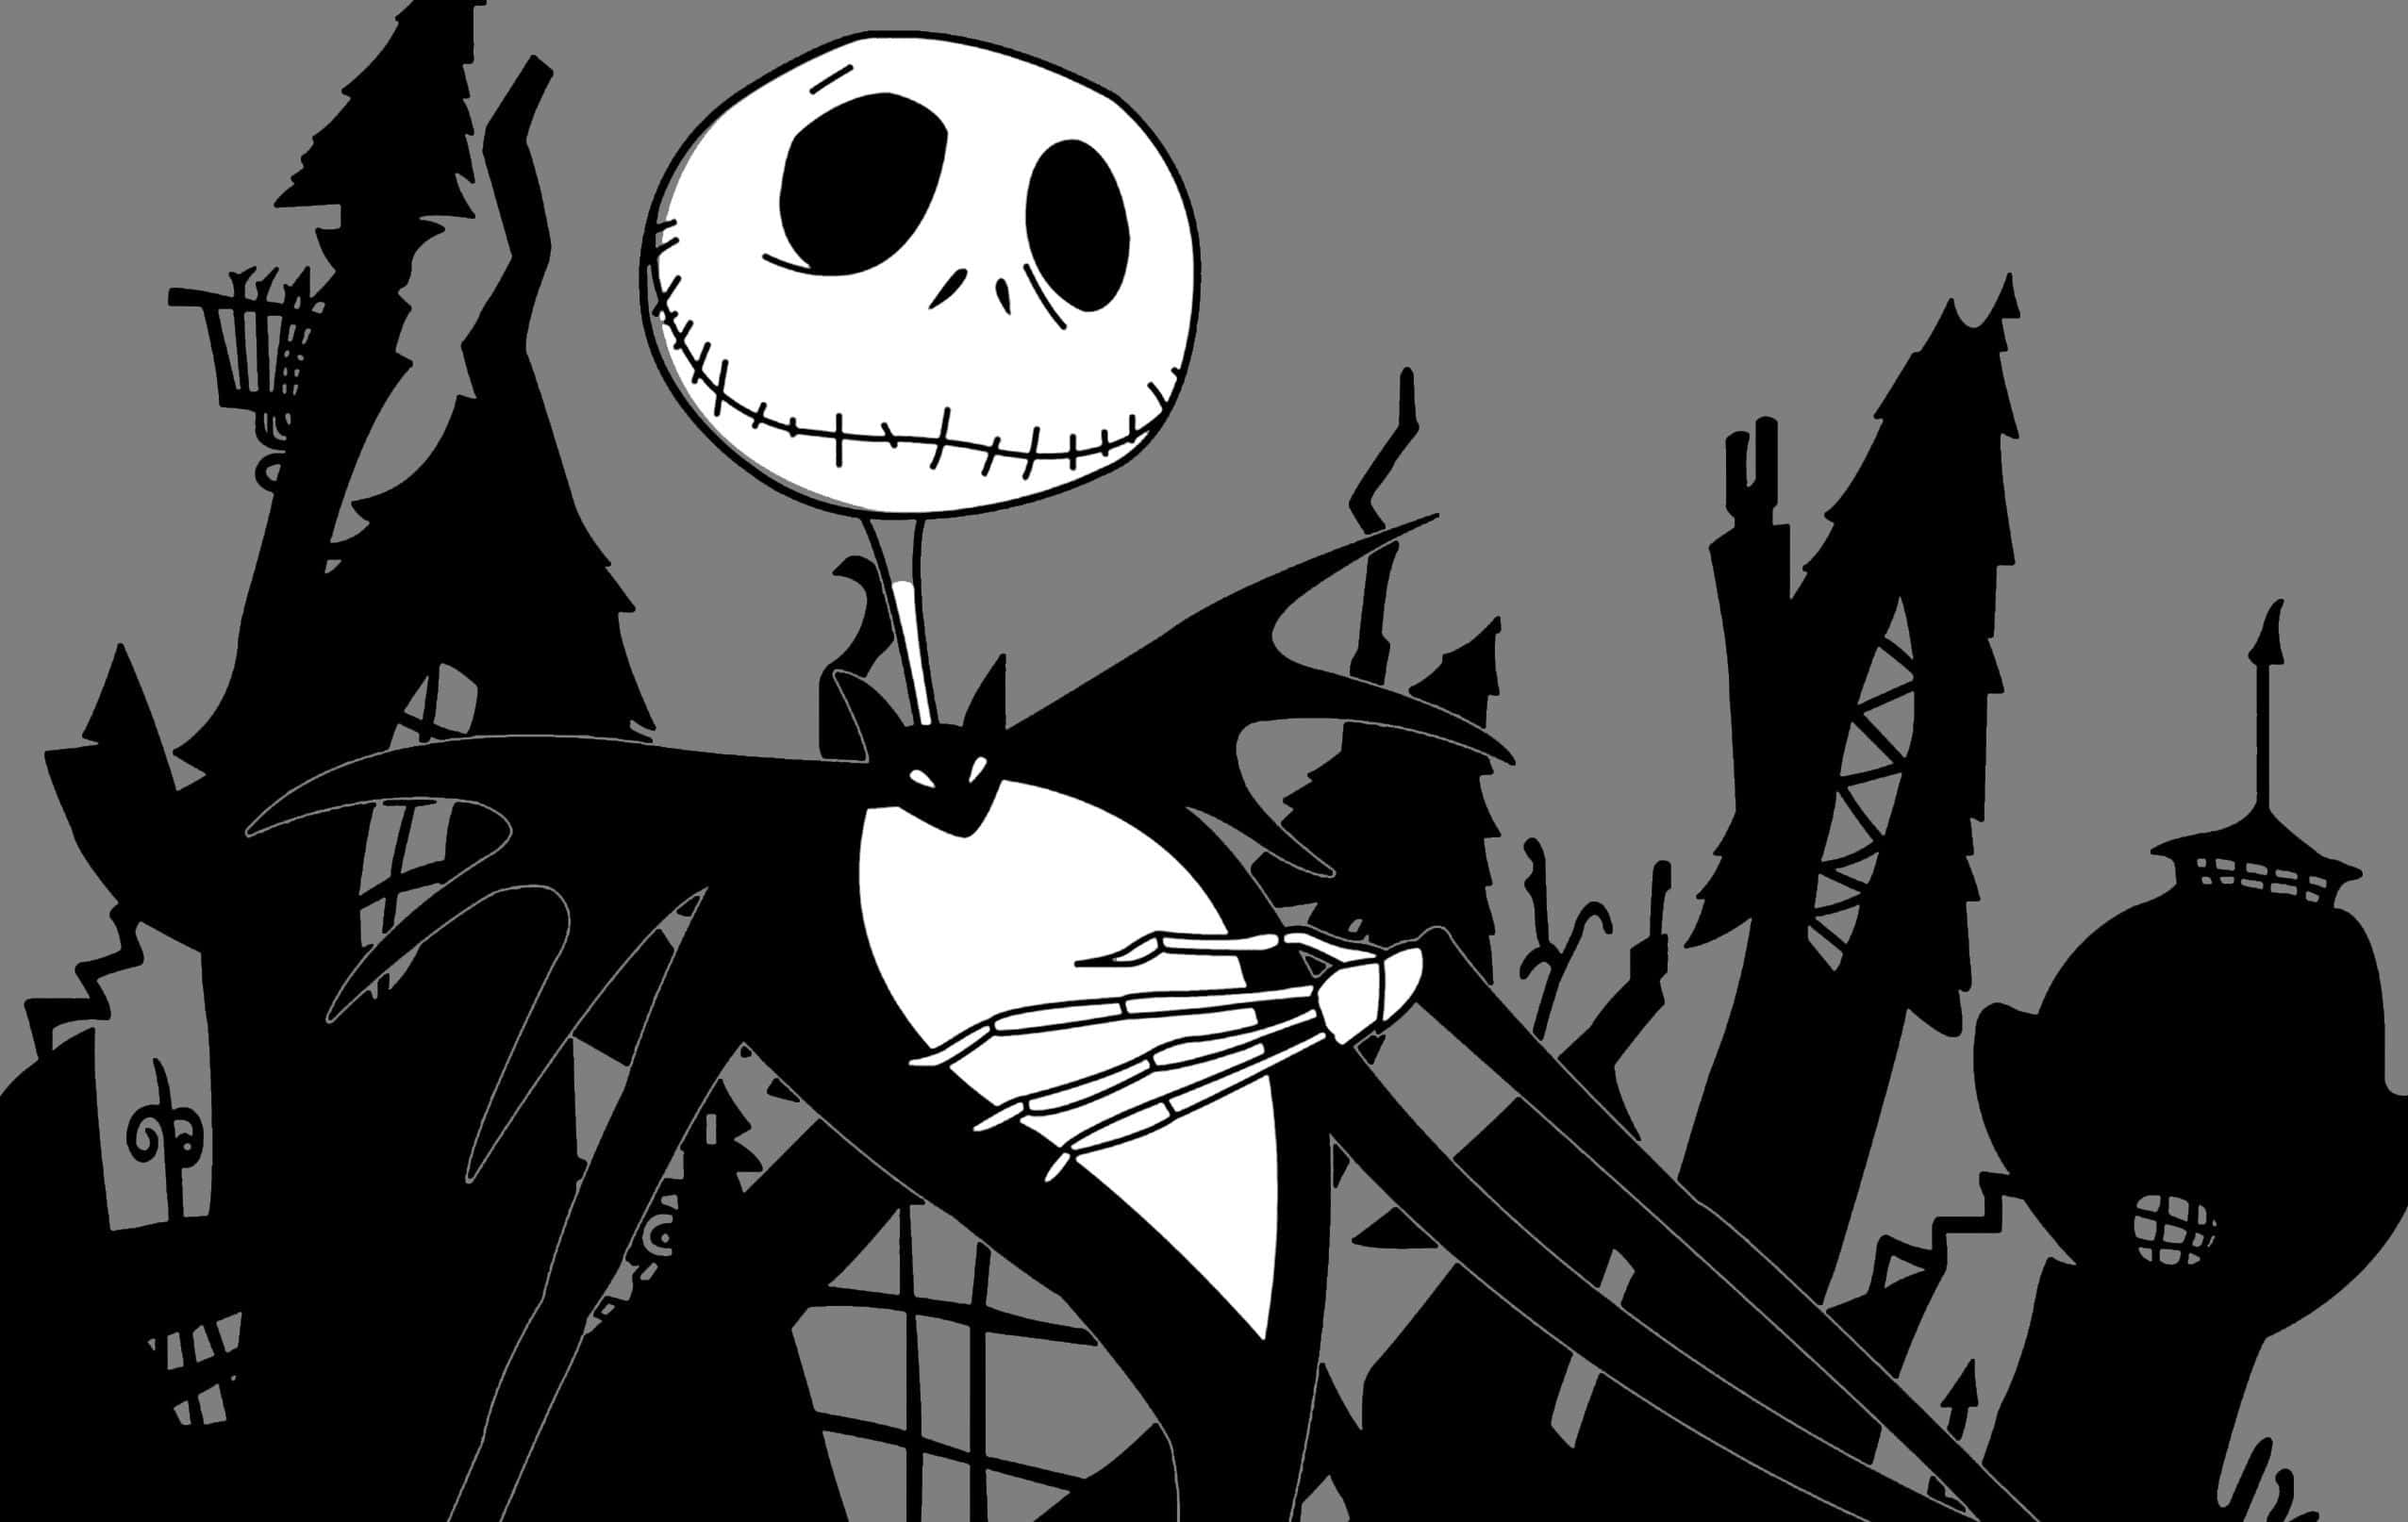 Get into the Christmas spirit with Jack Skellington in the spooky world of The Nightmare Before Christmas!